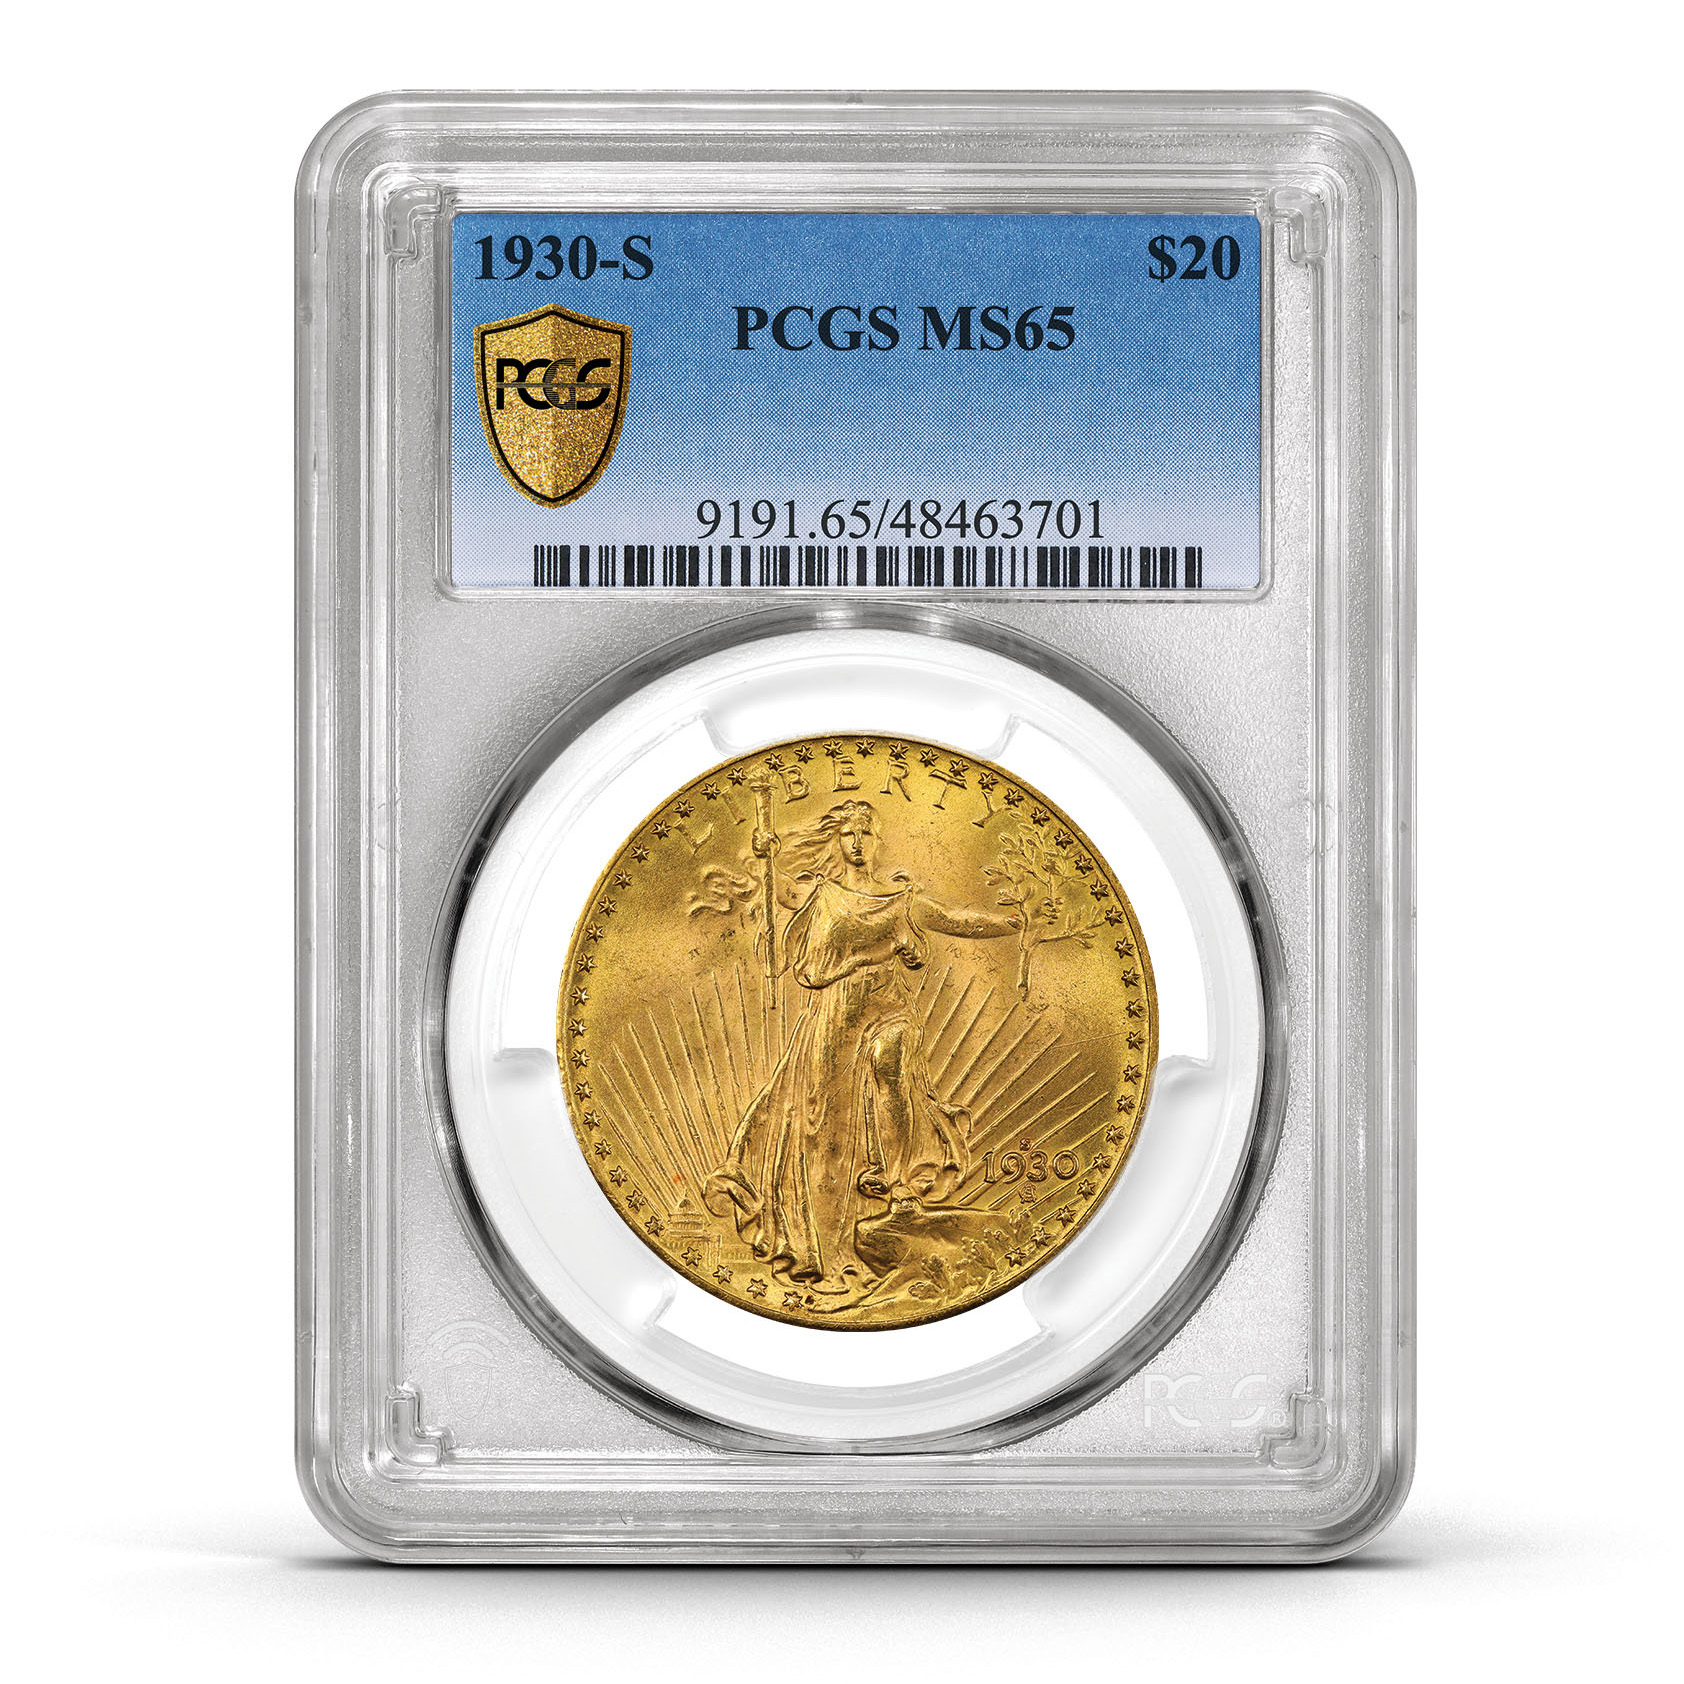 Article Image: PCGS Around the World:A Key-Date Saint-Gaudens Double Eagle